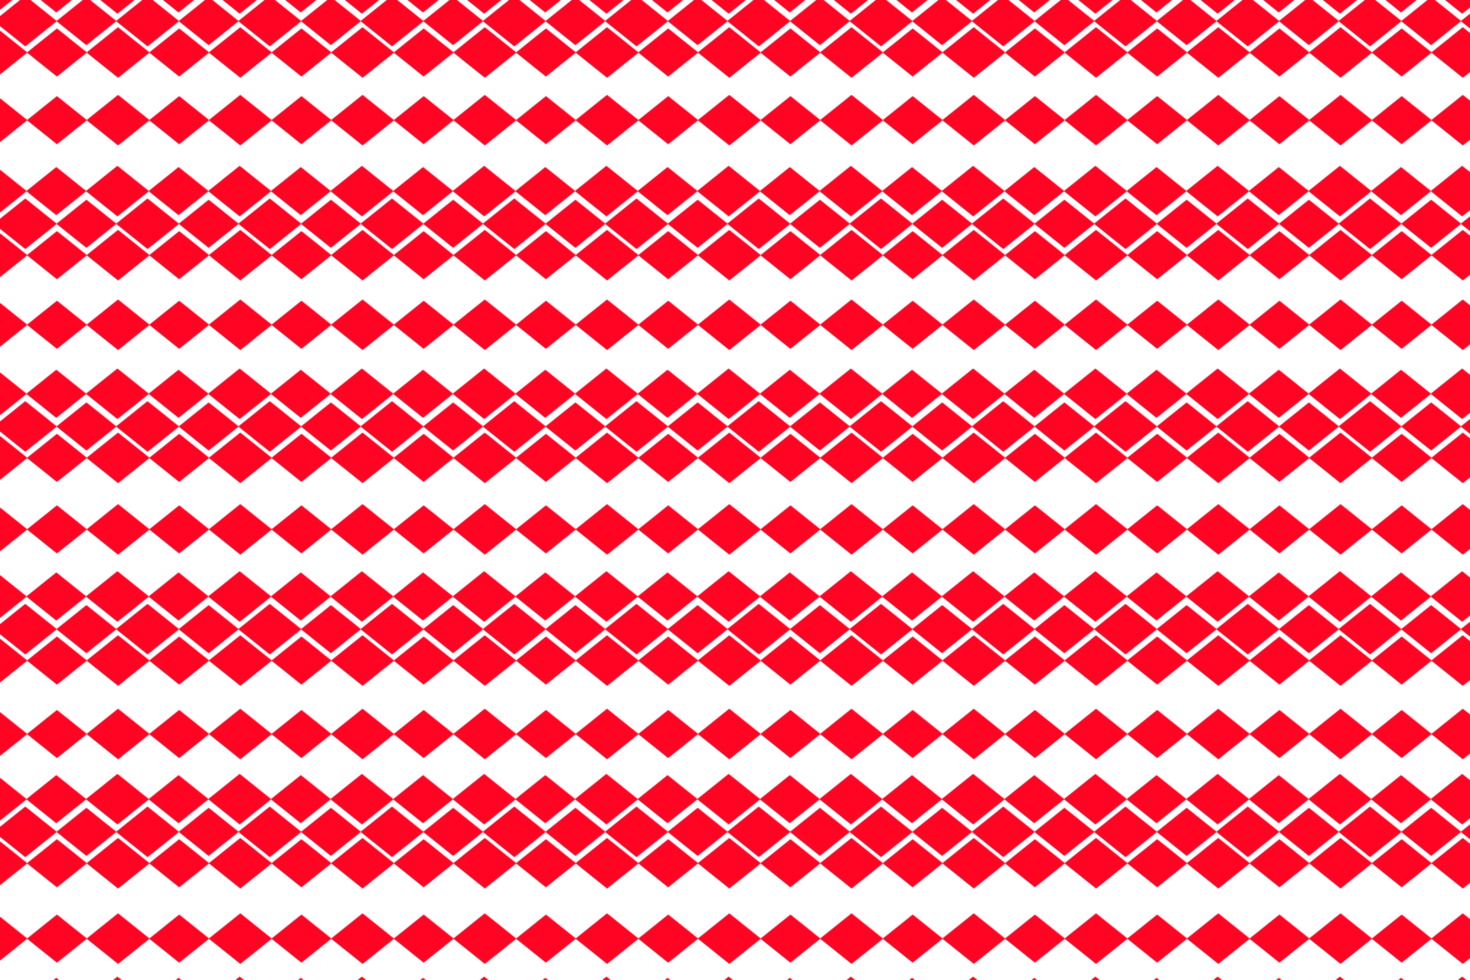 Tablecloth seamless pattern. picnic plaid background. red gingham cloth. checkered kitchen textures png